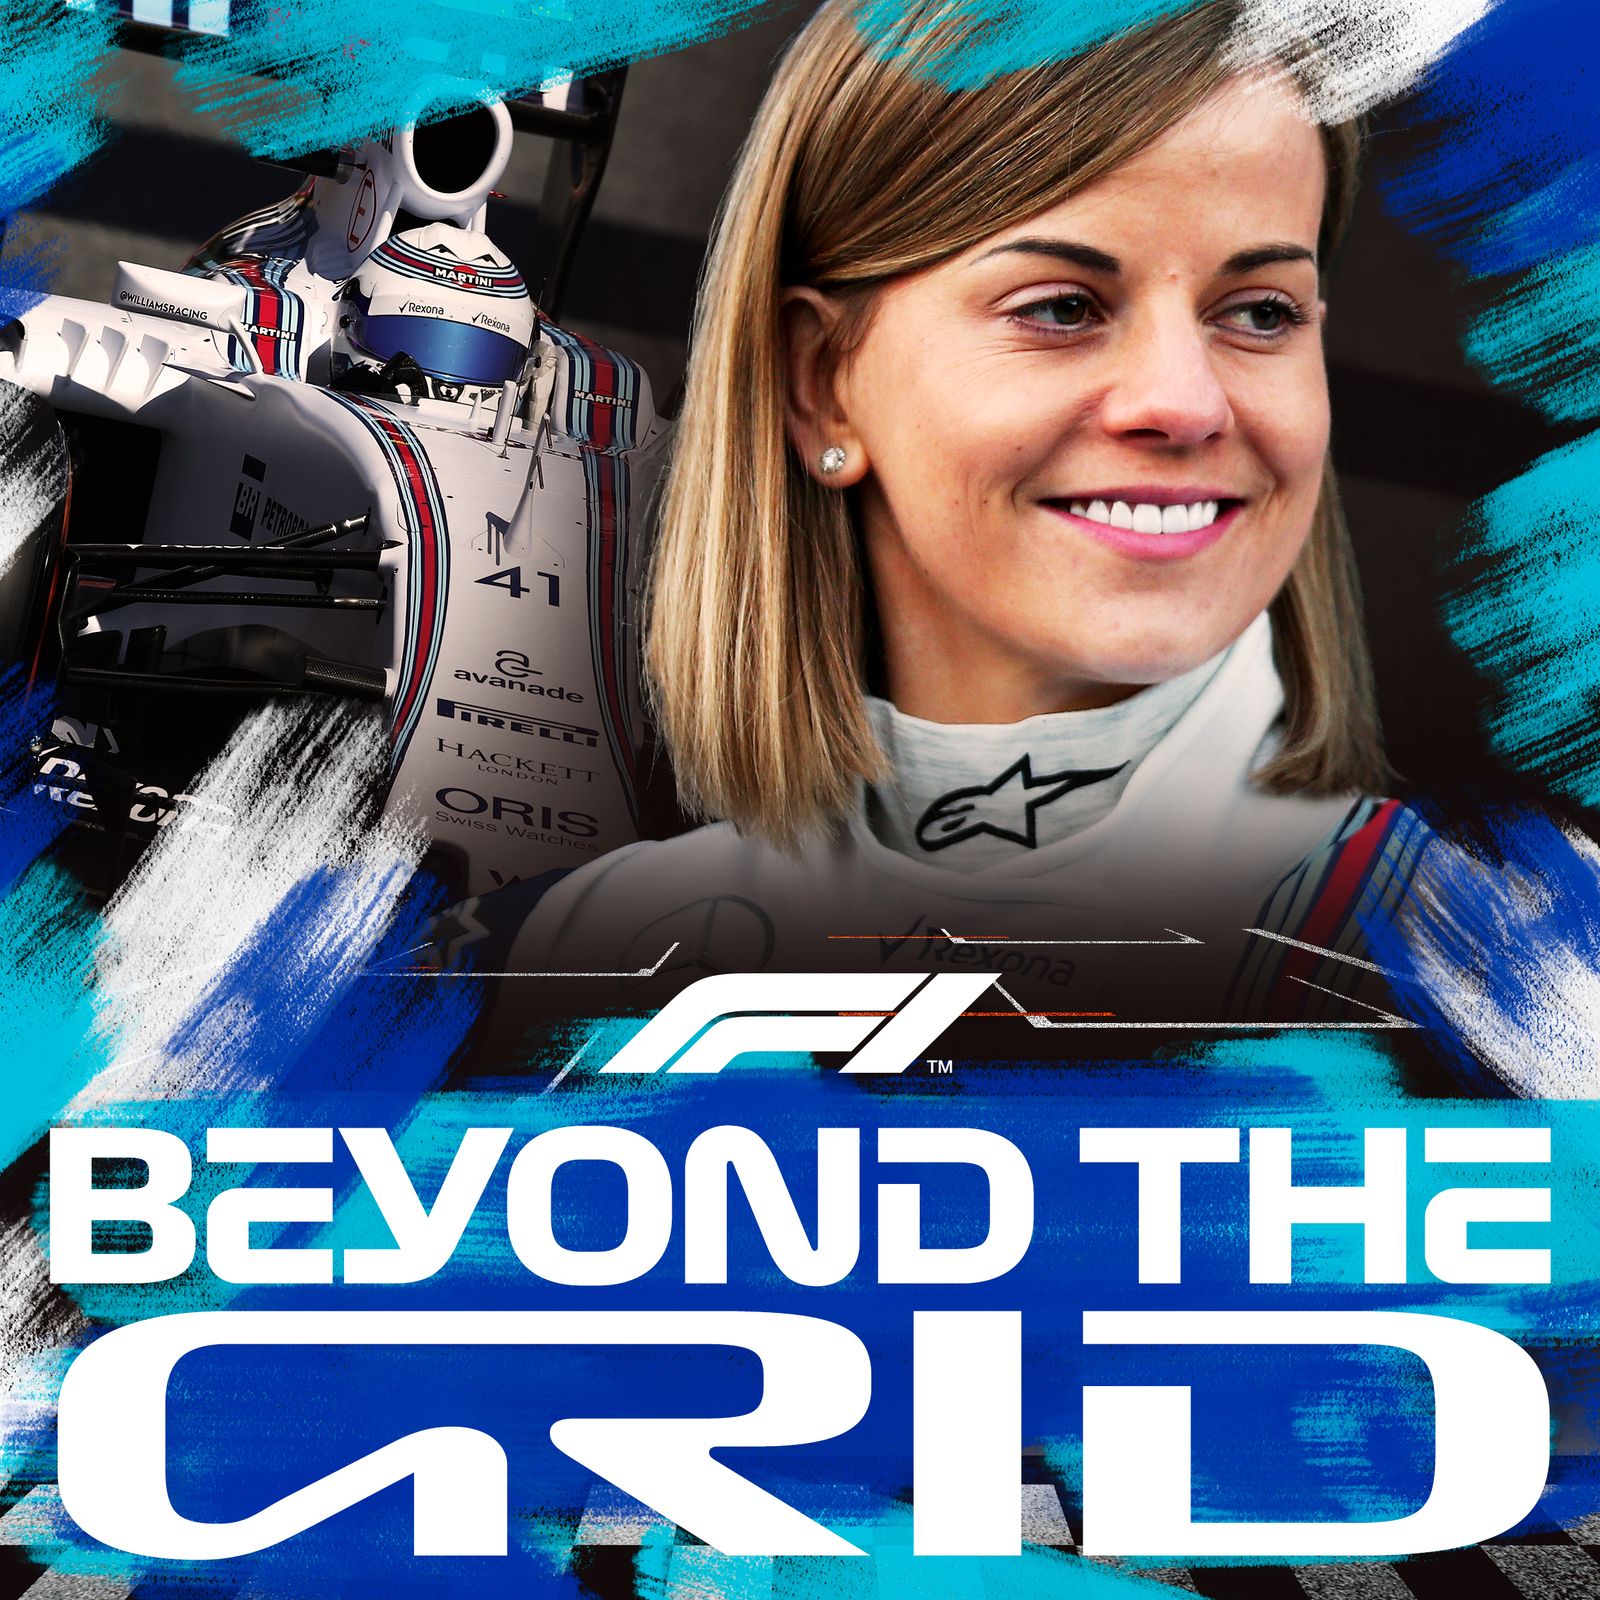 Susie Wolff: racer, role model, risk-taker